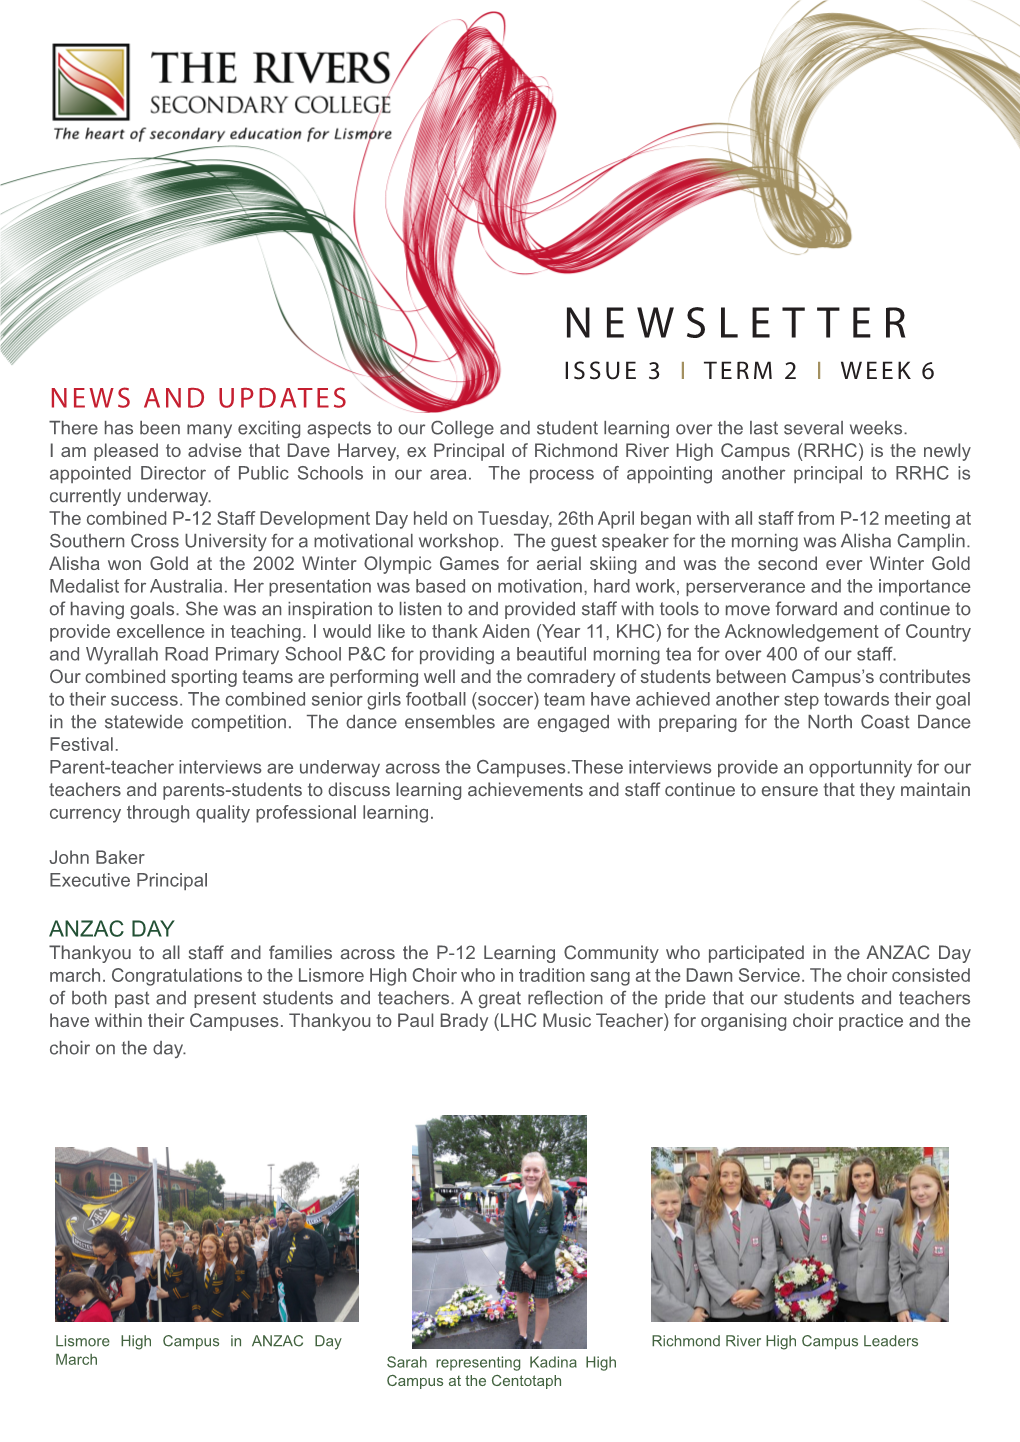 NEWSLETTER ISSUE 3 I TERM 2 I WEEK 6 NEWS and UPDATES There Has Been Many Exciting Aspects to Our College and Student Learning Over the Last Several Weeks